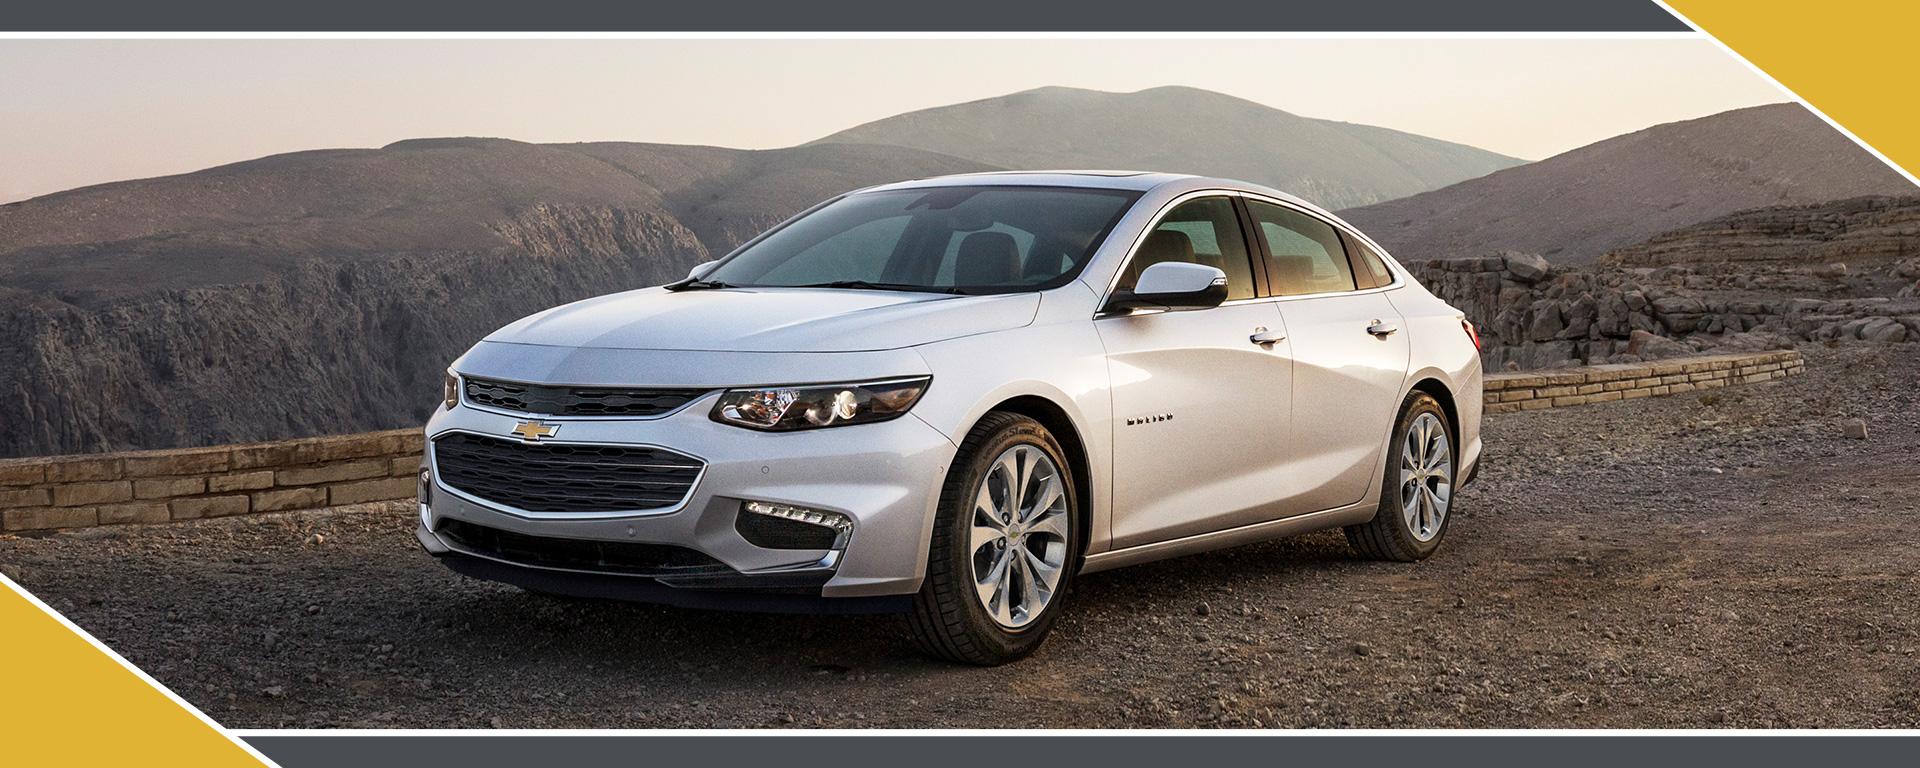 Used Chevy Malibu for Sale in Milford Ohio